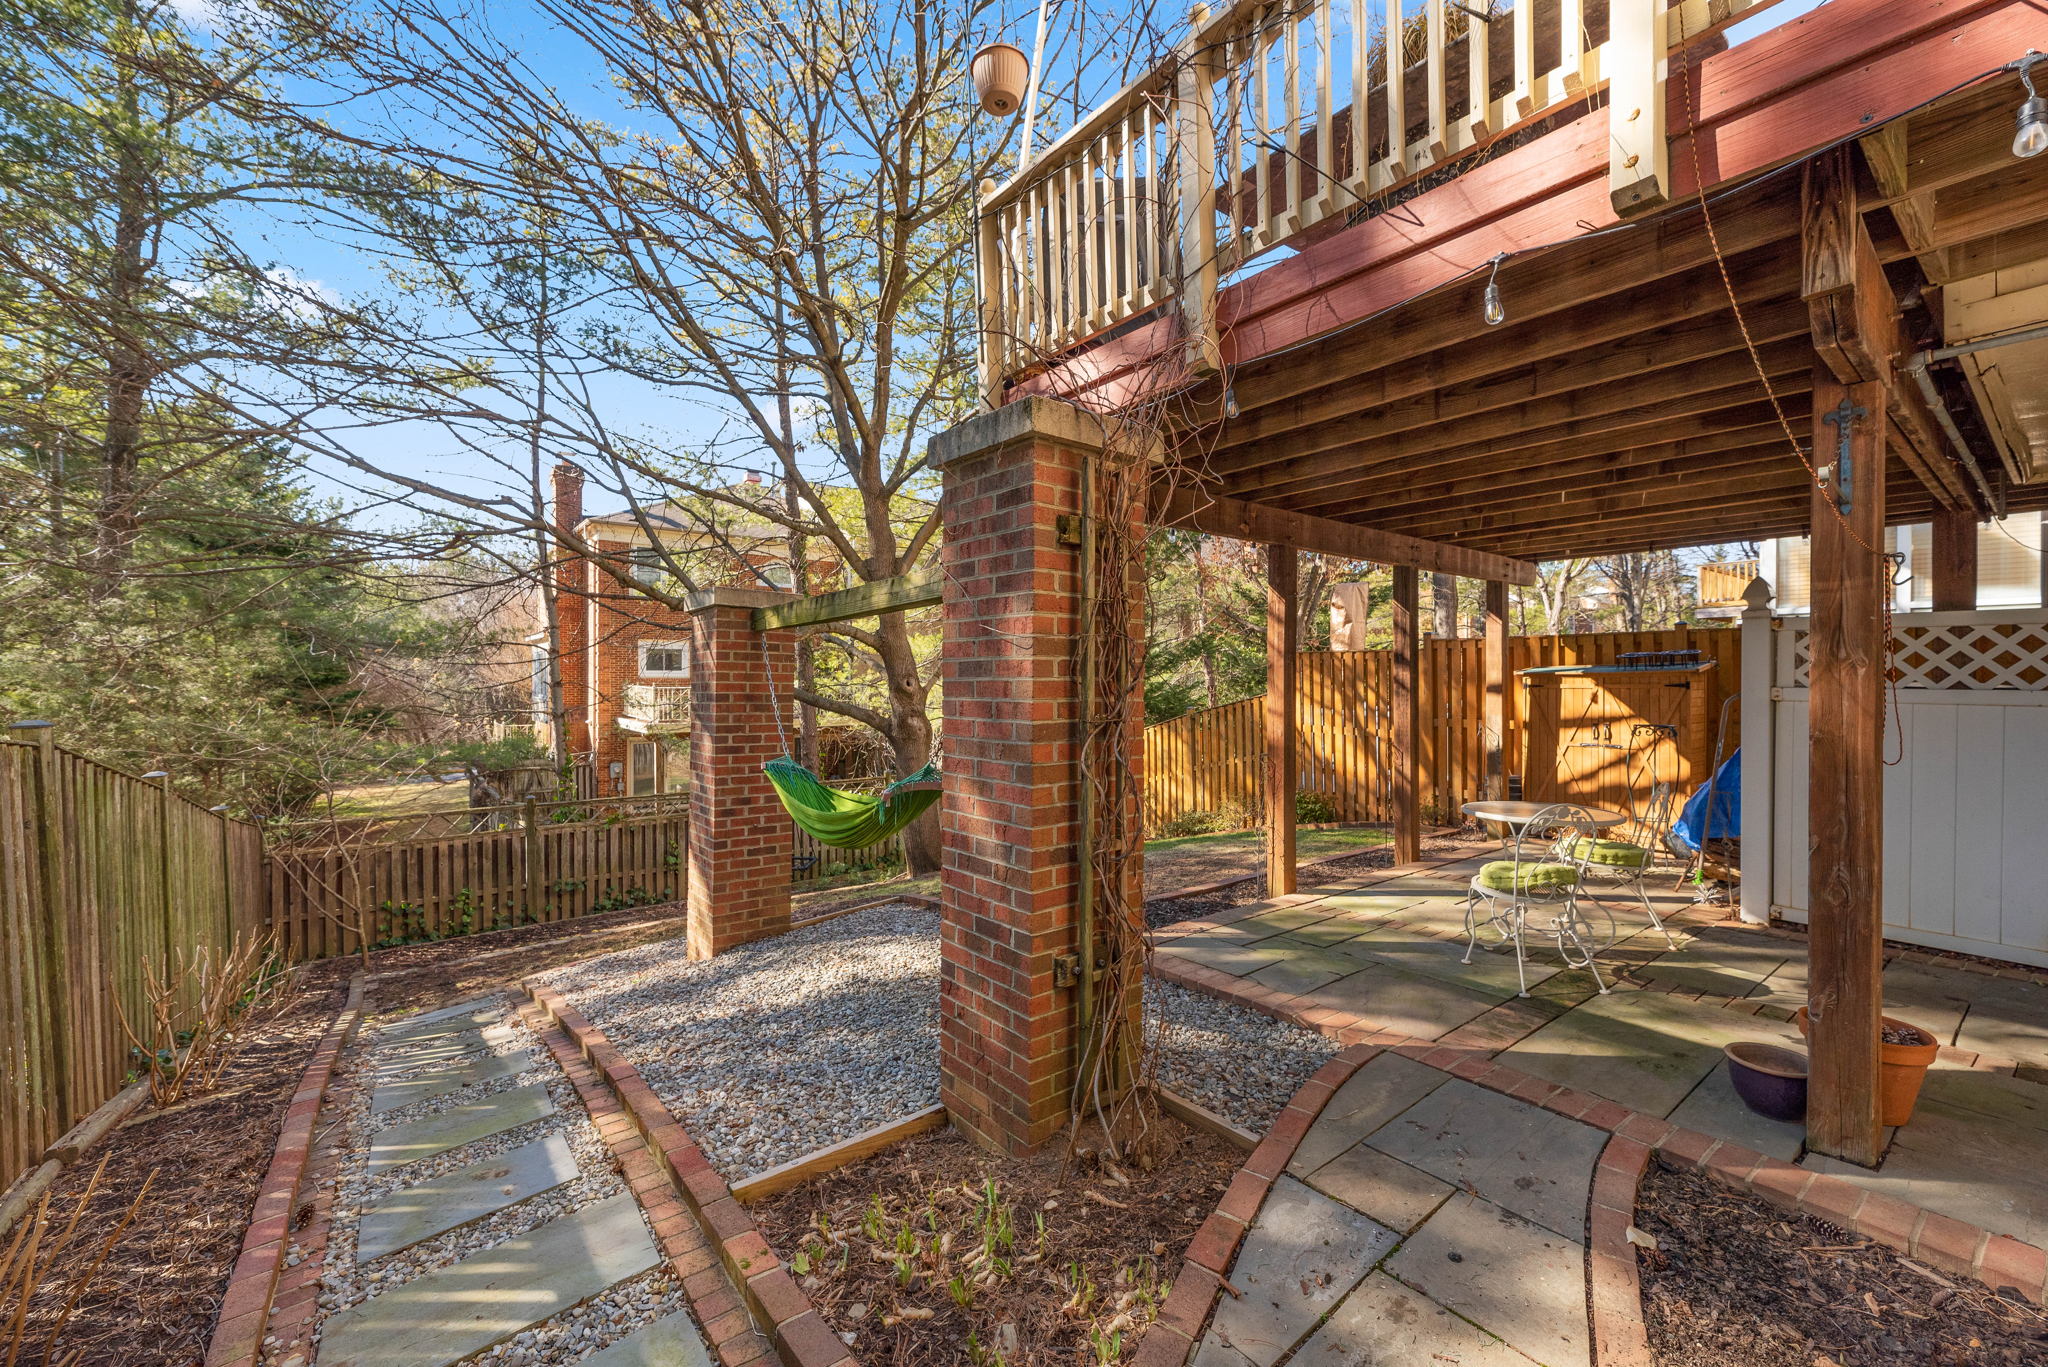 Expansive Brick and Stone Patio and Leadwalks